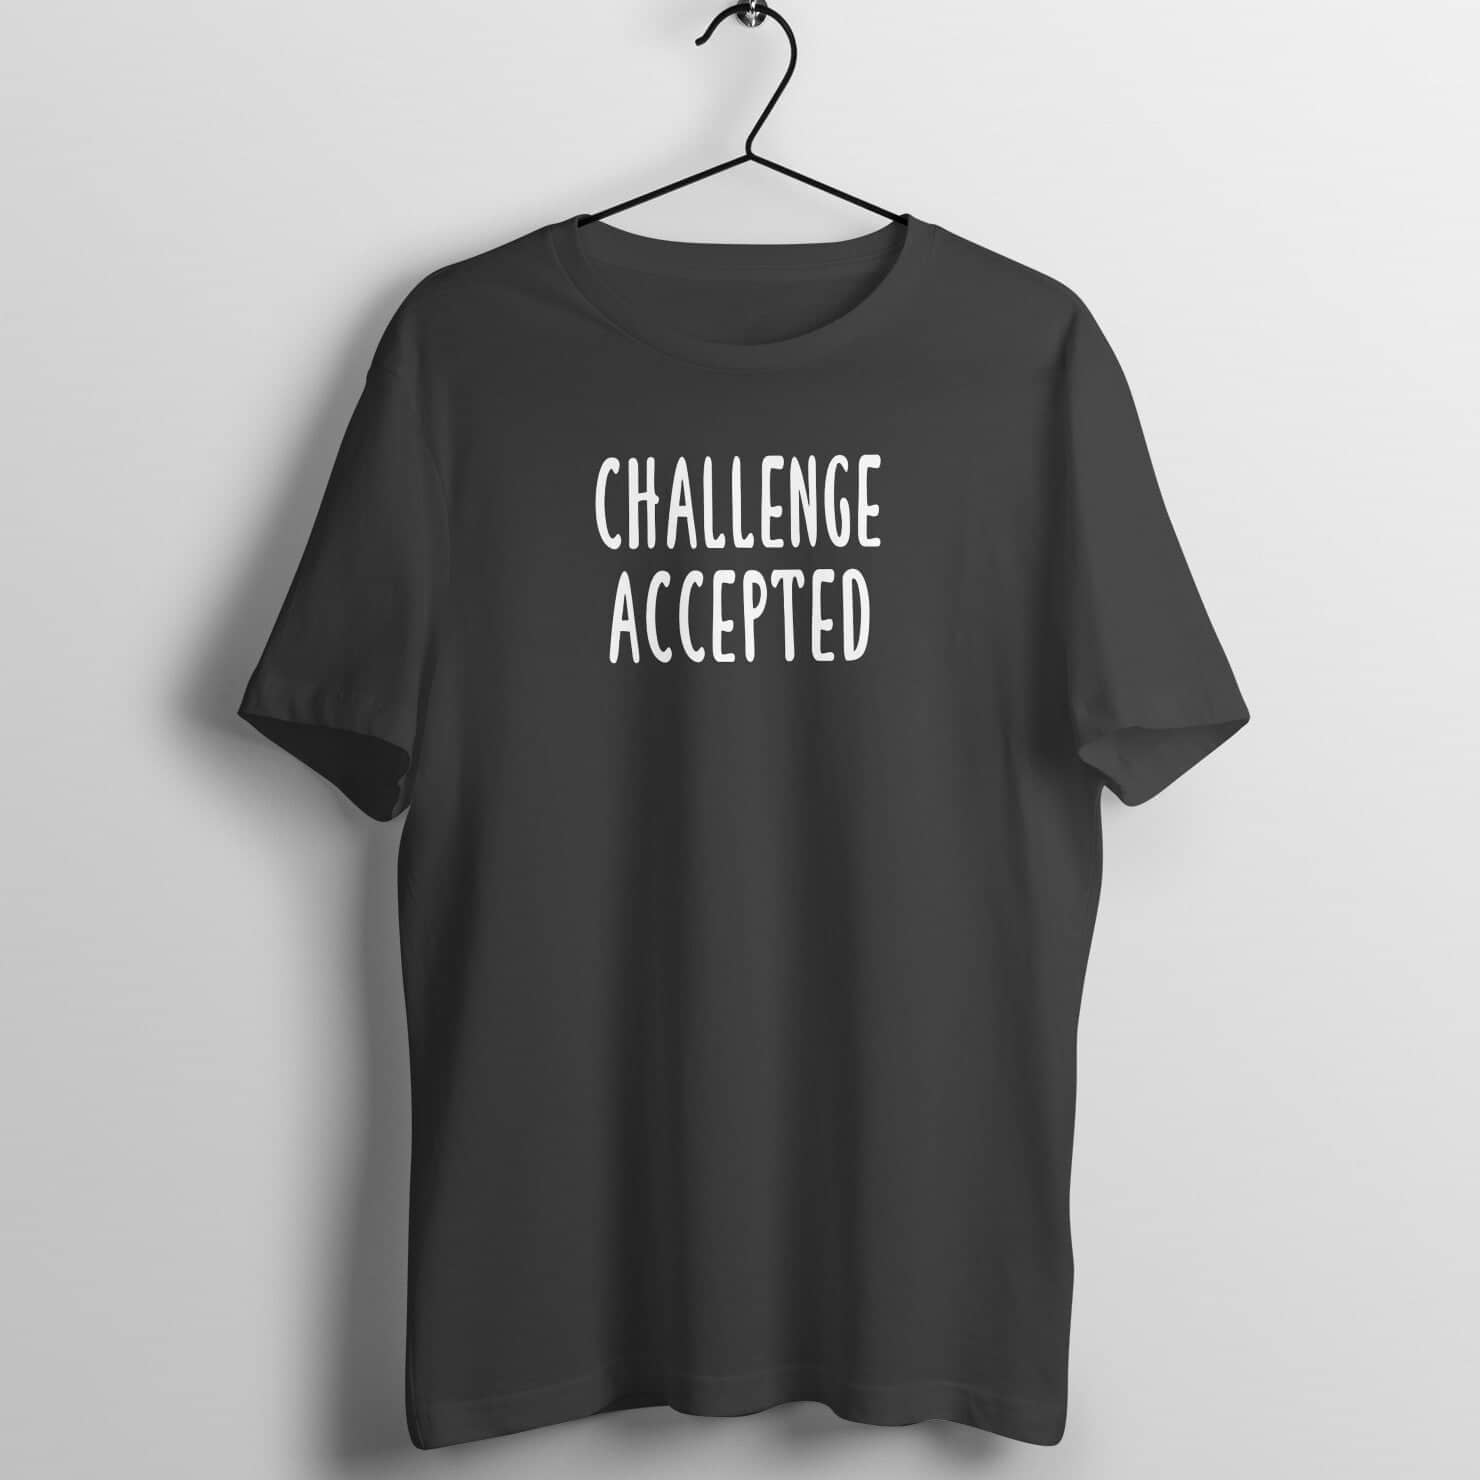 Challenge Accepted Exclusive Barney Stinson HIMYM T Shirt for Men and Women freeshipping - Catch My Drift India